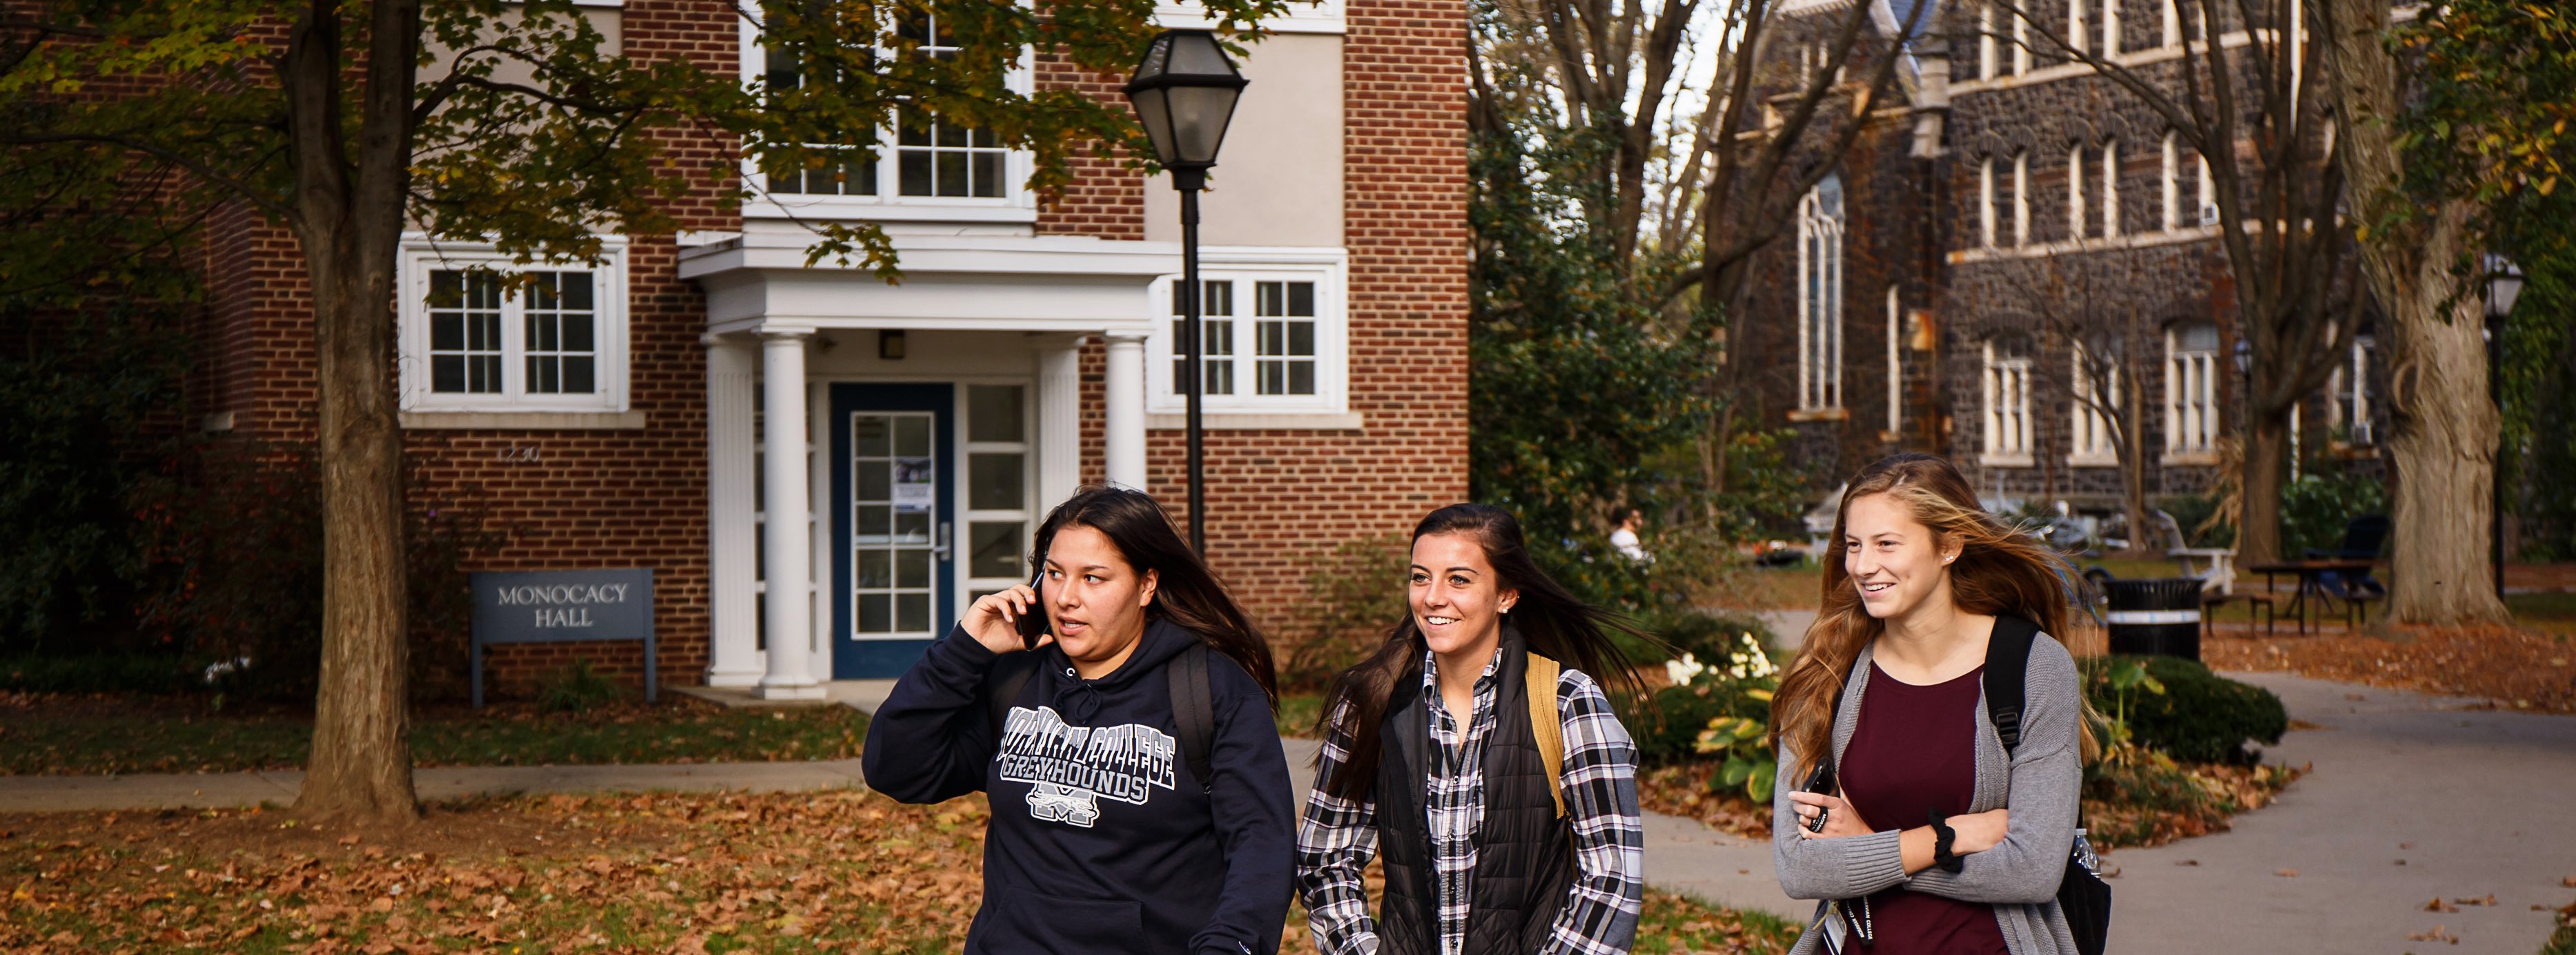 Three students walk in a group out front of Monocacy Hall.